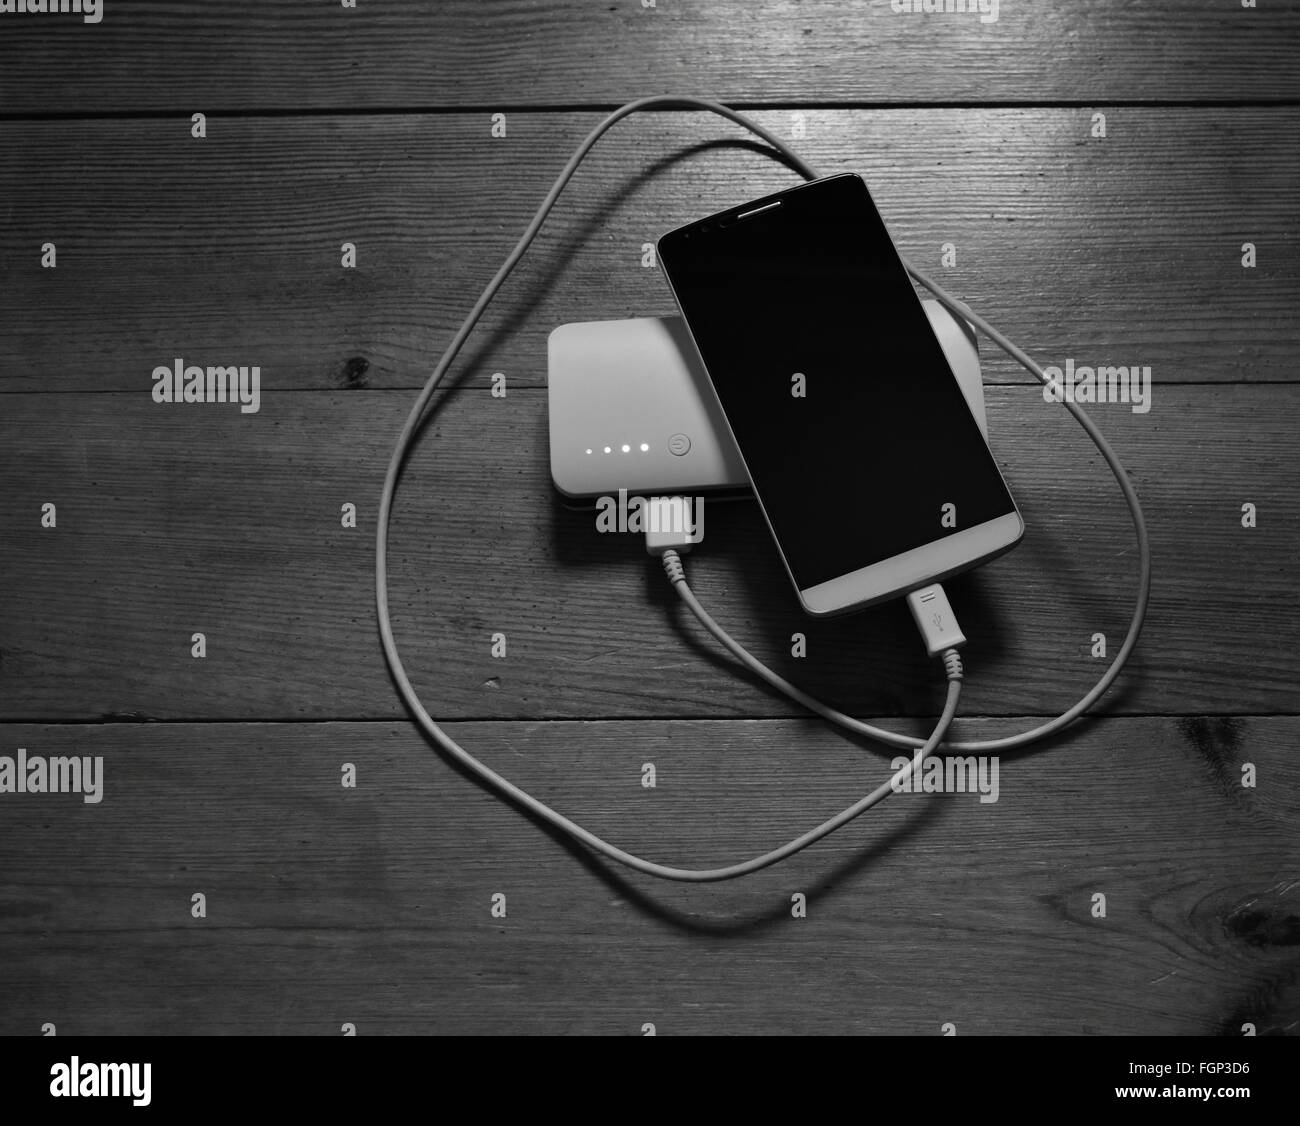 Smartphone and powerbank on wooden background Stock Photo